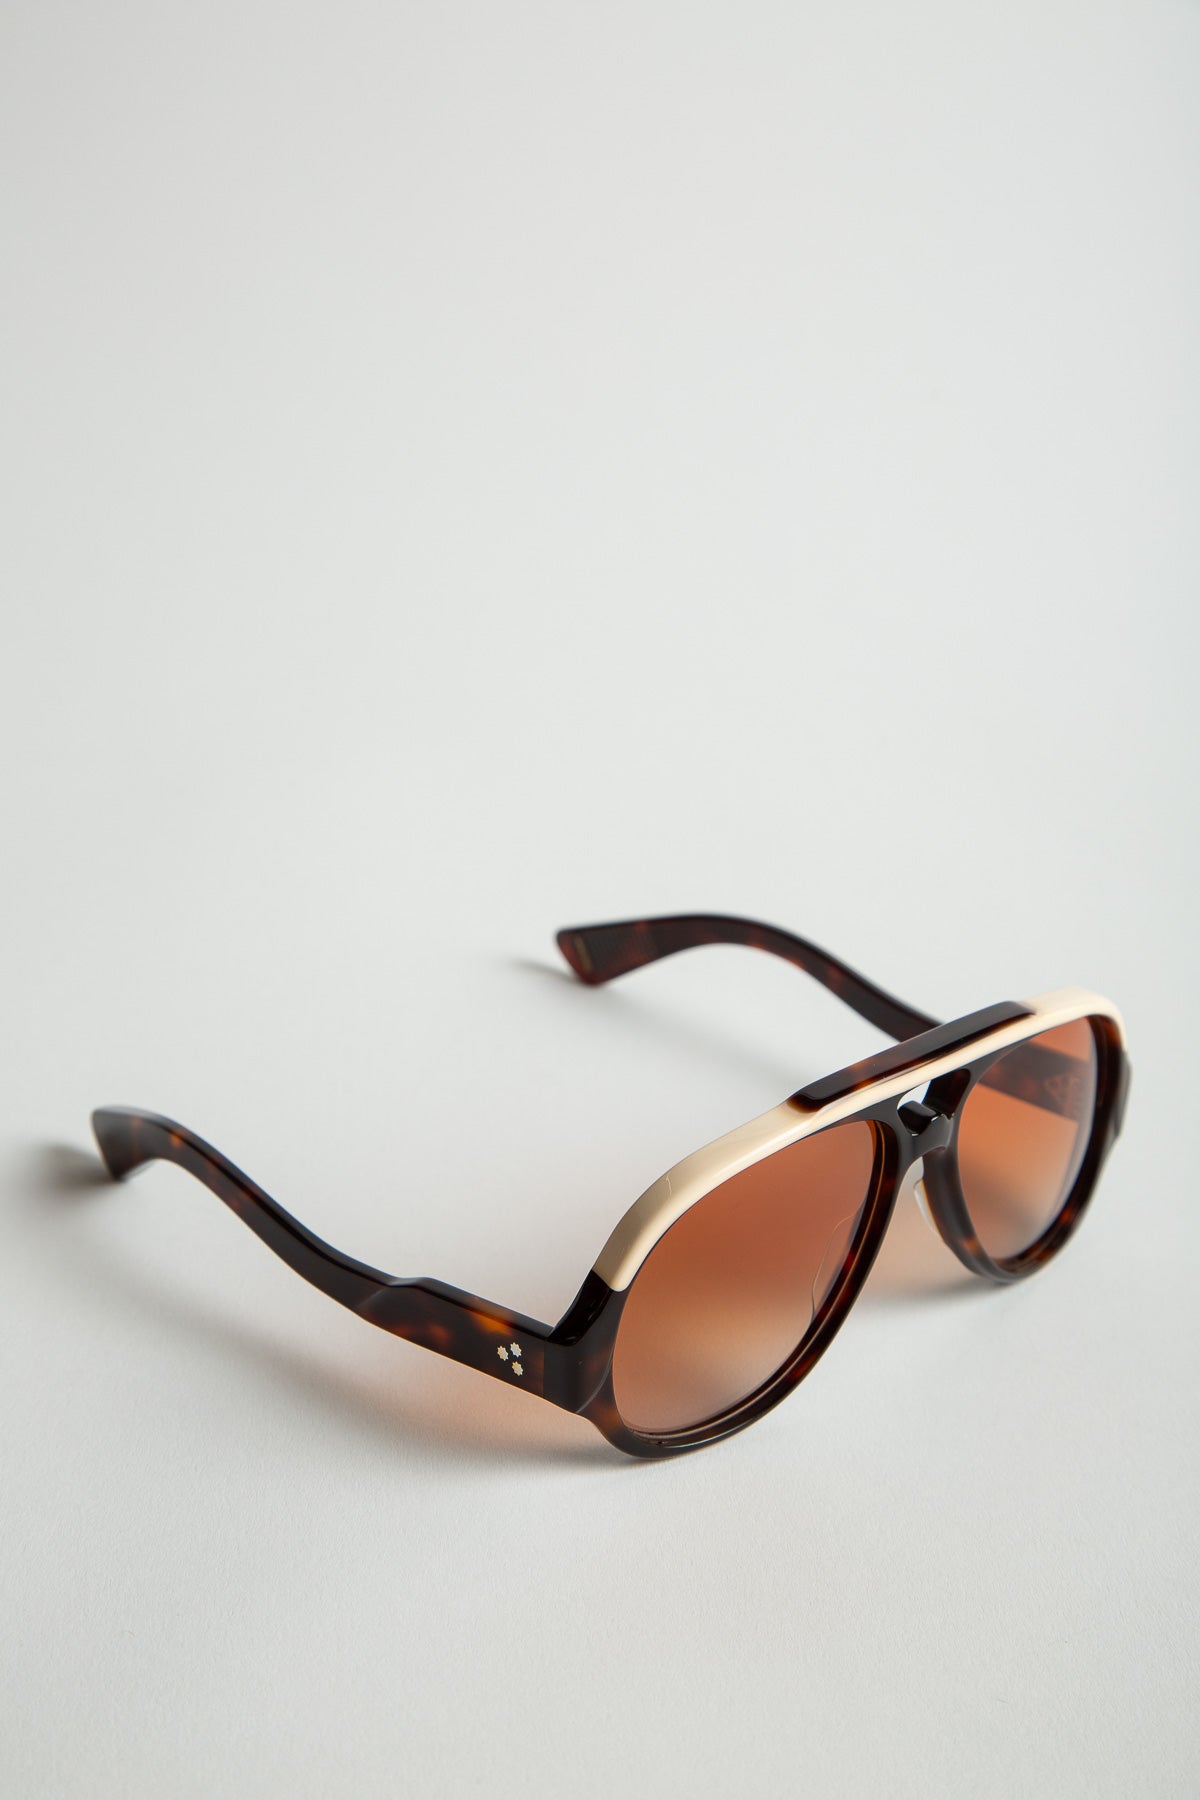 JACQUES MARIE MAGE | ORION SUNGLASSES